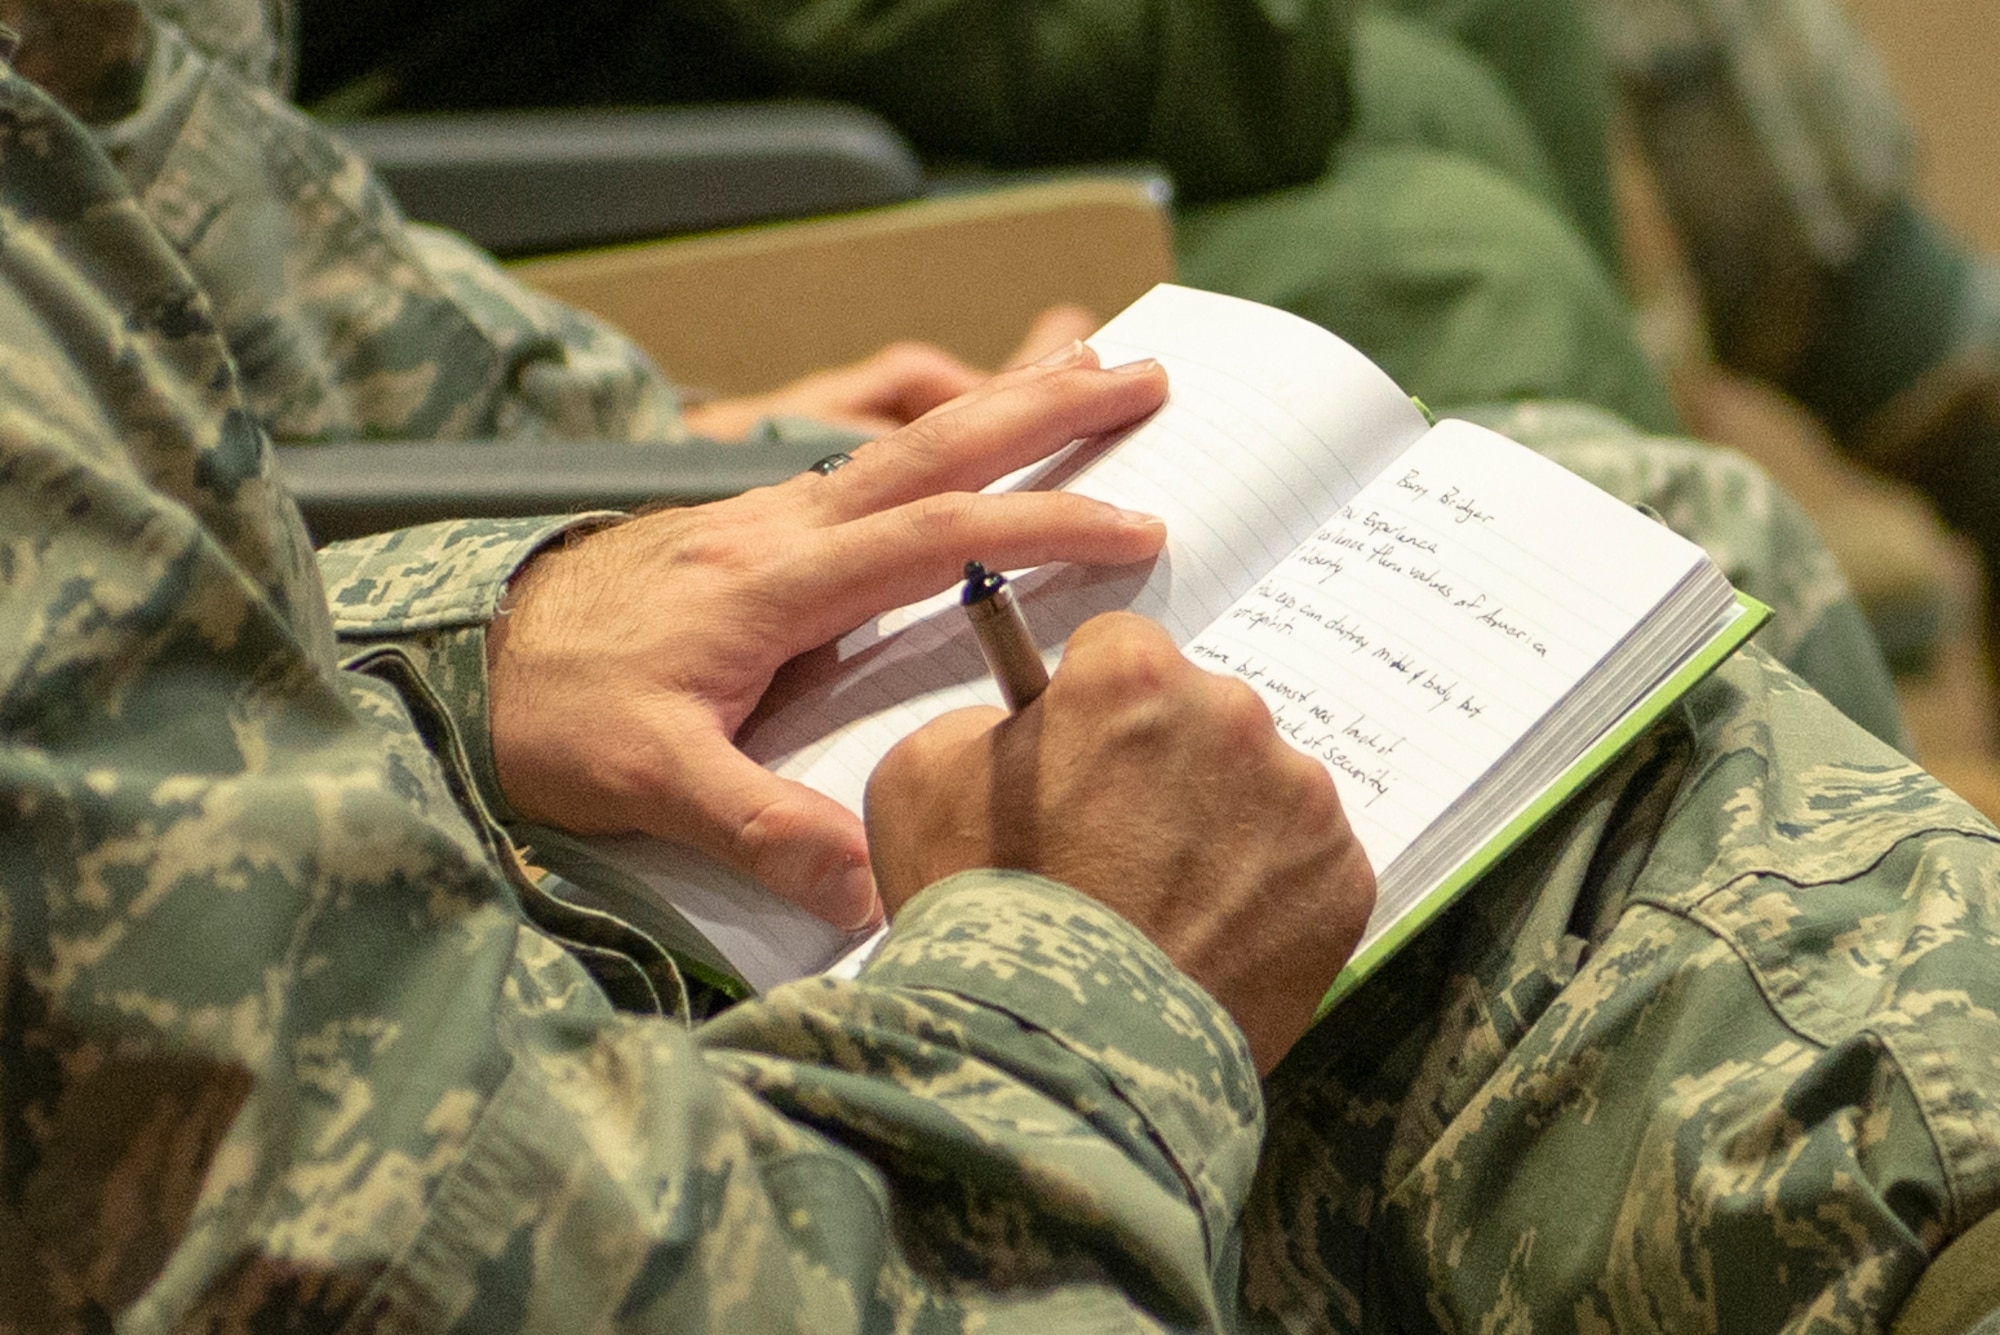 Team Offutt member takes notes during speech presented by retired Air Force Lt. Col Barry Bridger at the commander’s updated briefing May 16, 2019, at Offutt Air Force Base, Nebraska. Bridger is a six-year survivor of Vietnam’s Hoa Loa prisoner of war camp.